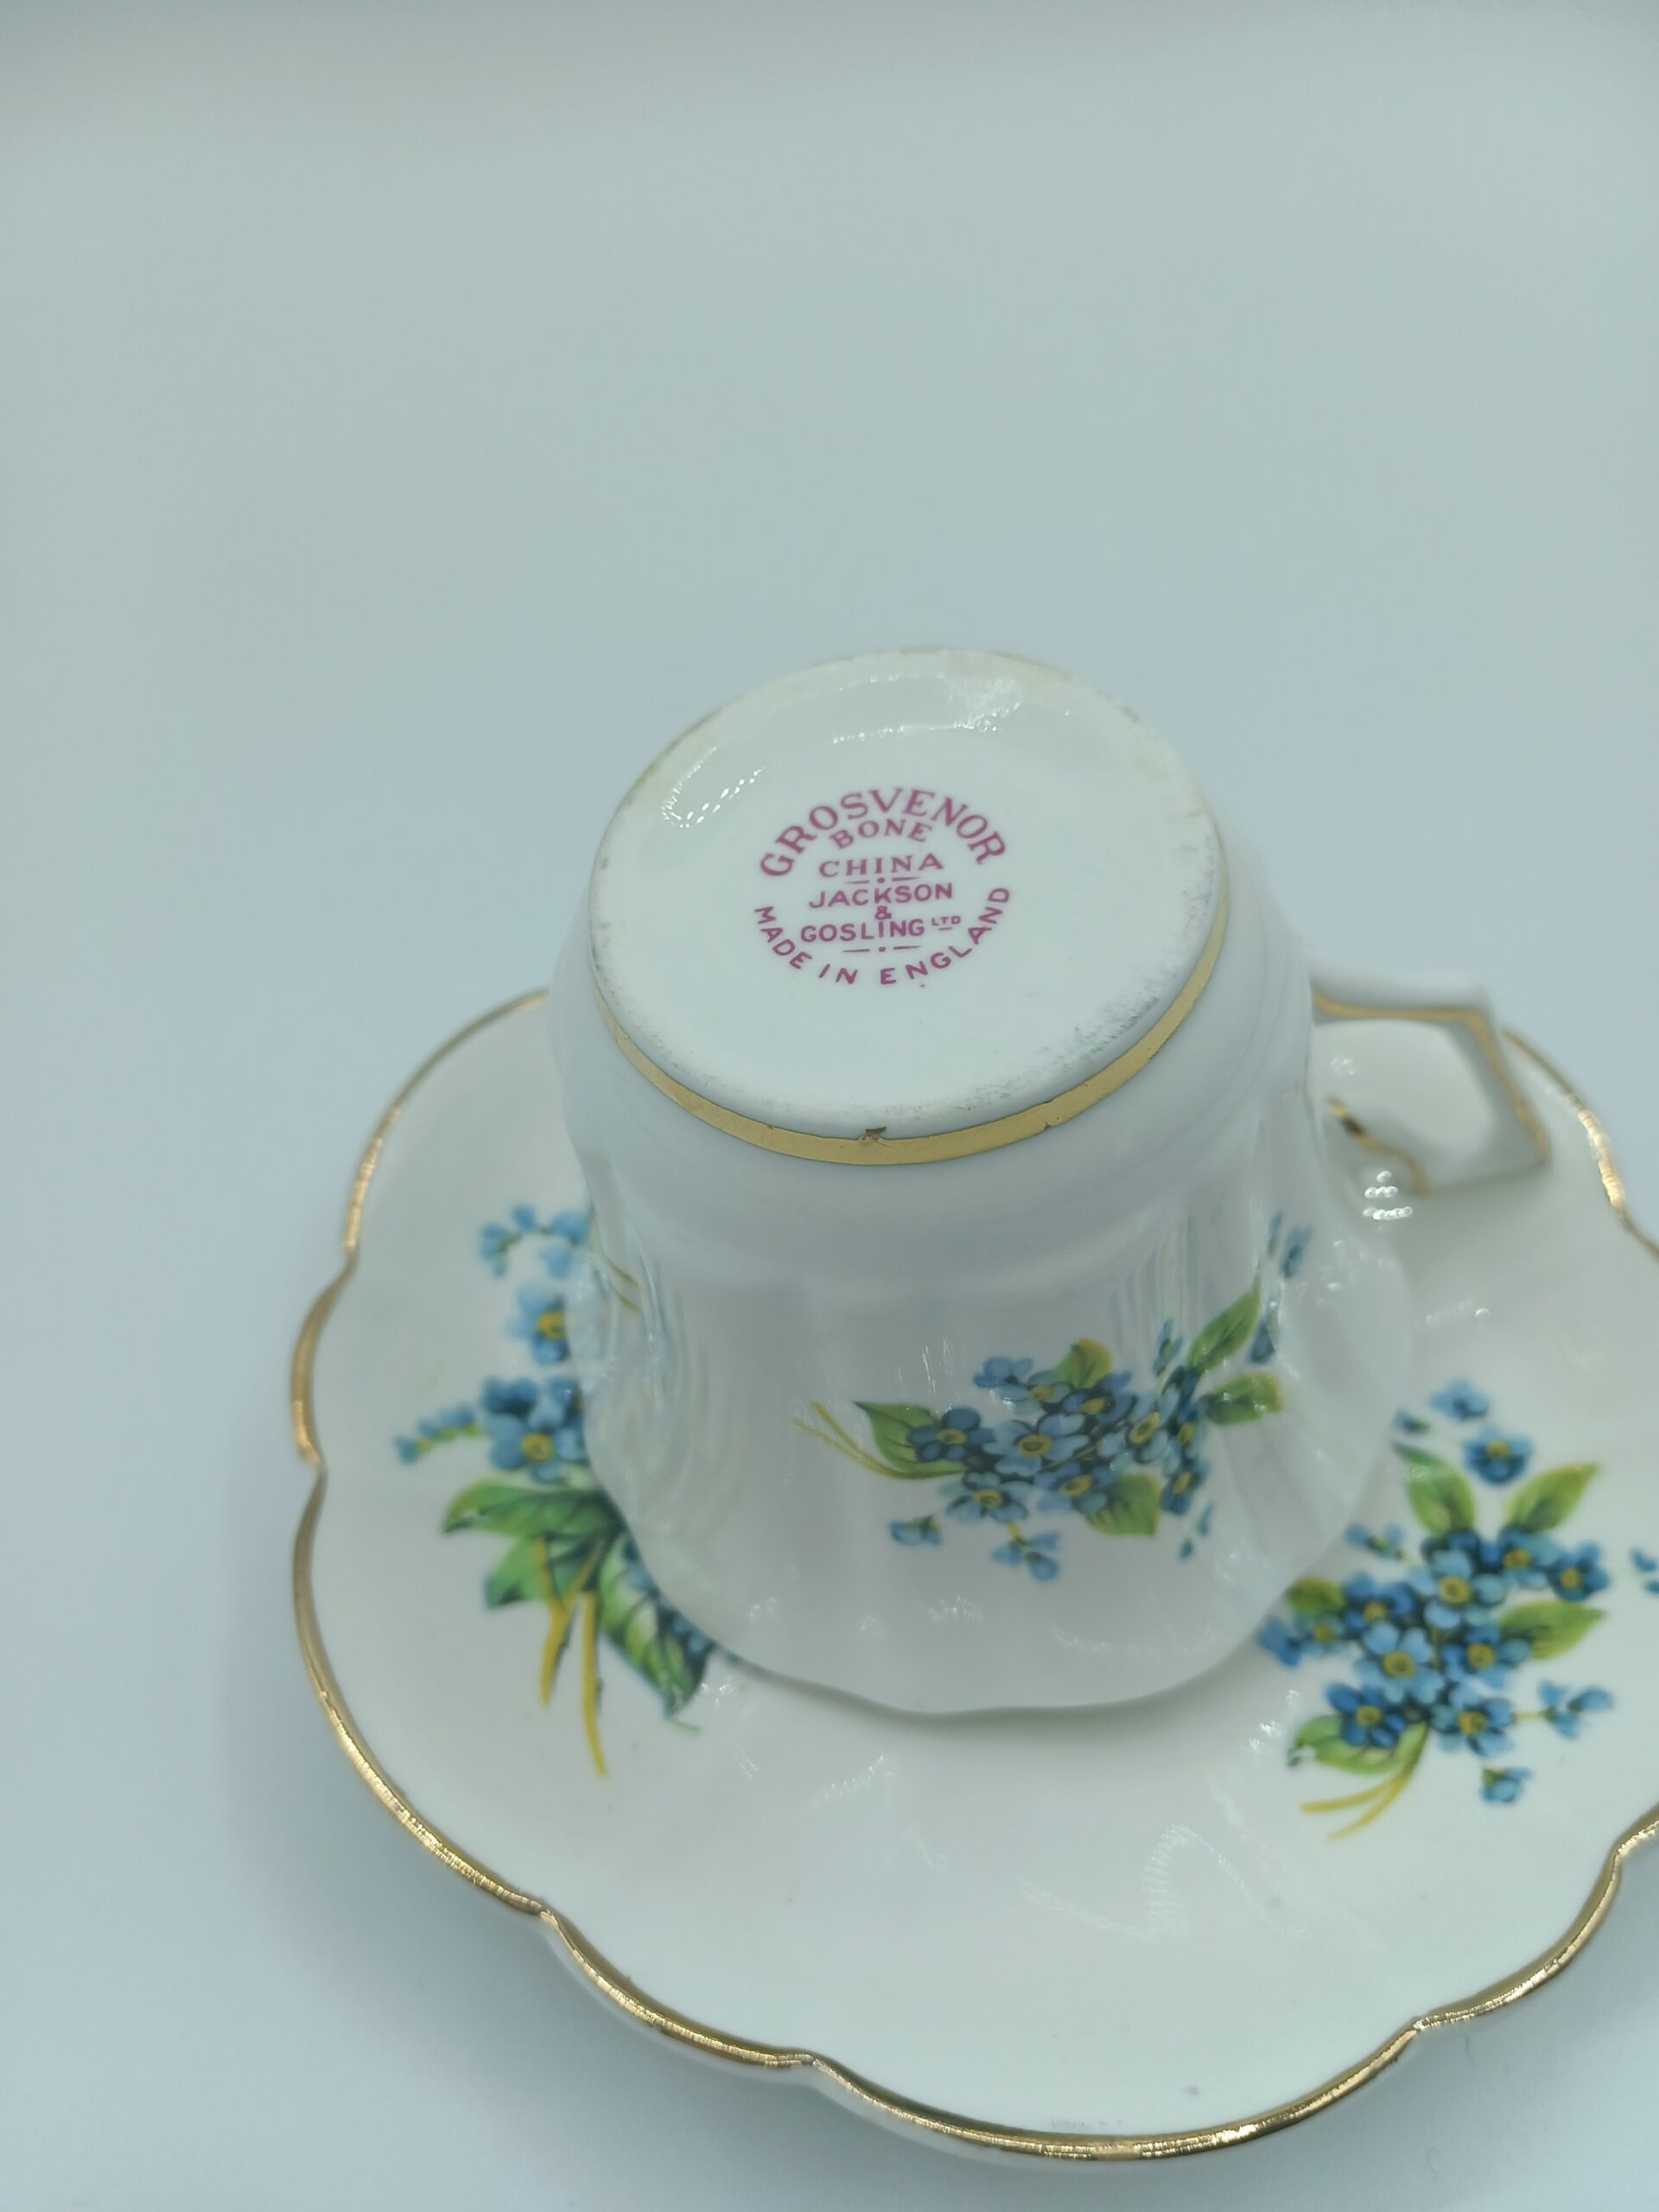 Grosvenor China Blue Duchess Footed Cup and Saucer Made in England 